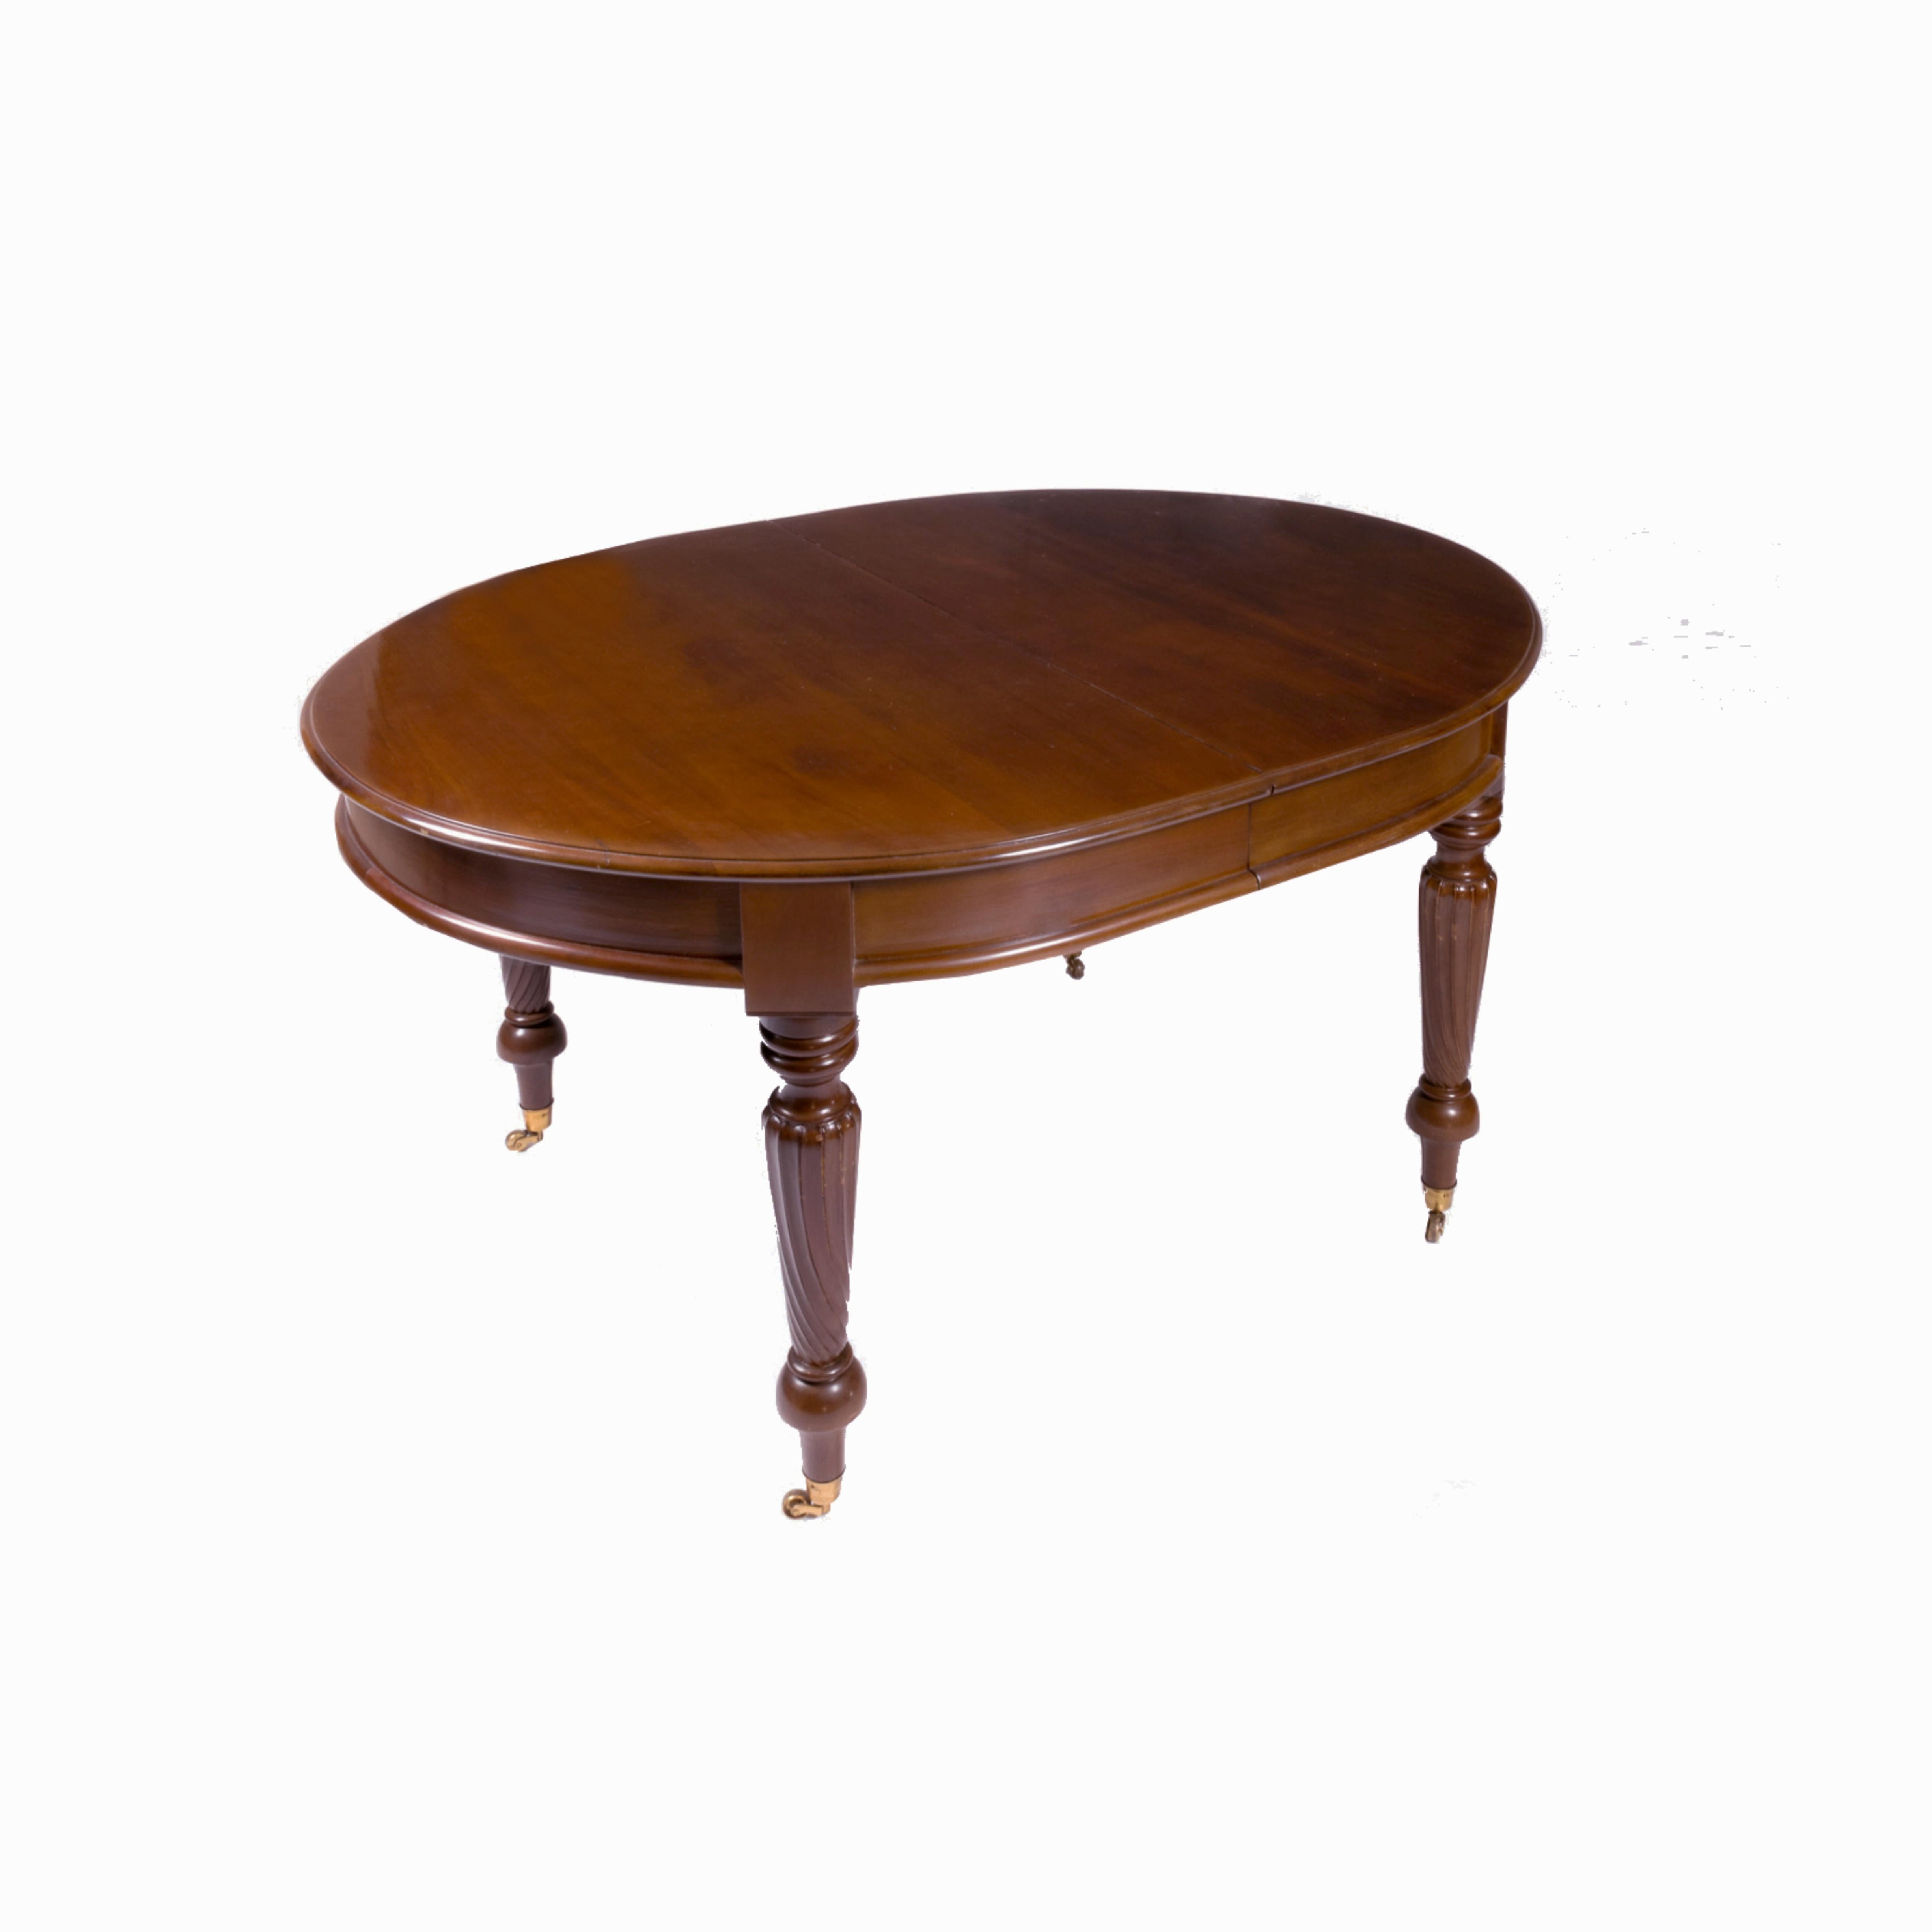 A Portuguese mahogany dining table from the early 1900s, with shakes and turned legs on castors with extensions and third pair of legs that retracts to create stability in the style of Queen Maria the I, inspired by the british asthetic of the